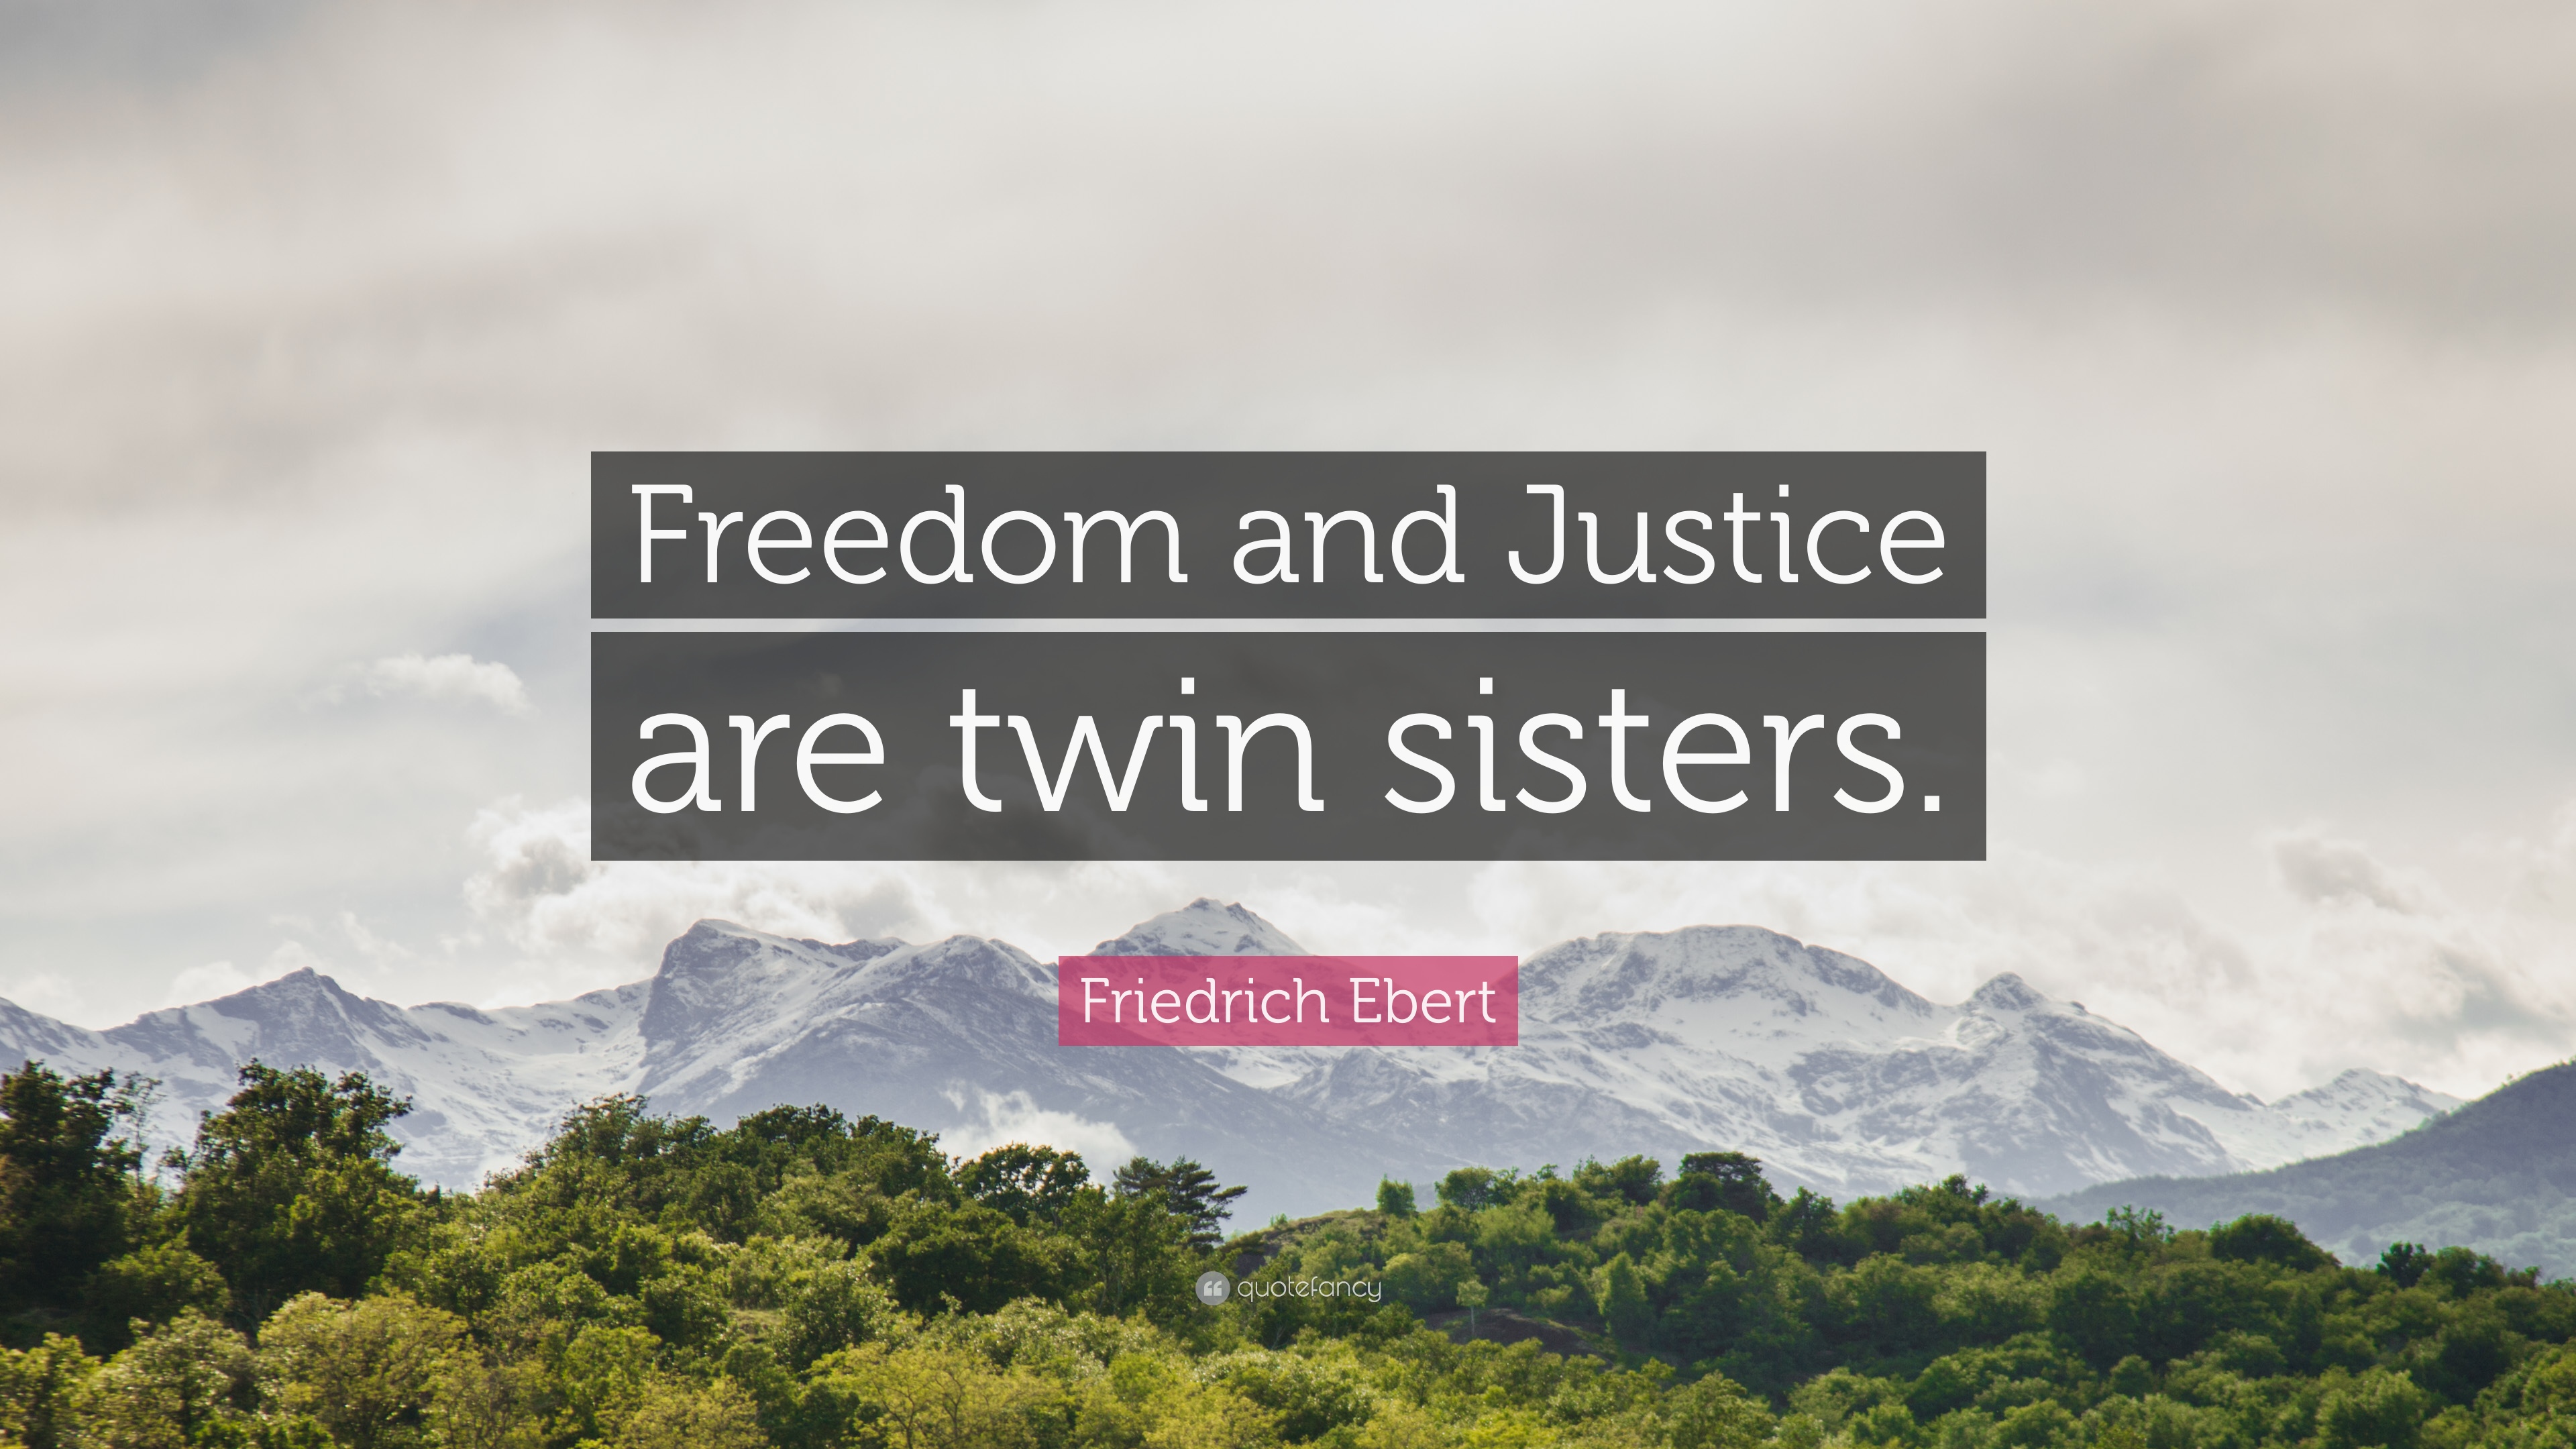 Friedrich Ebert Quote: “Freedom and Justice are twin sisters